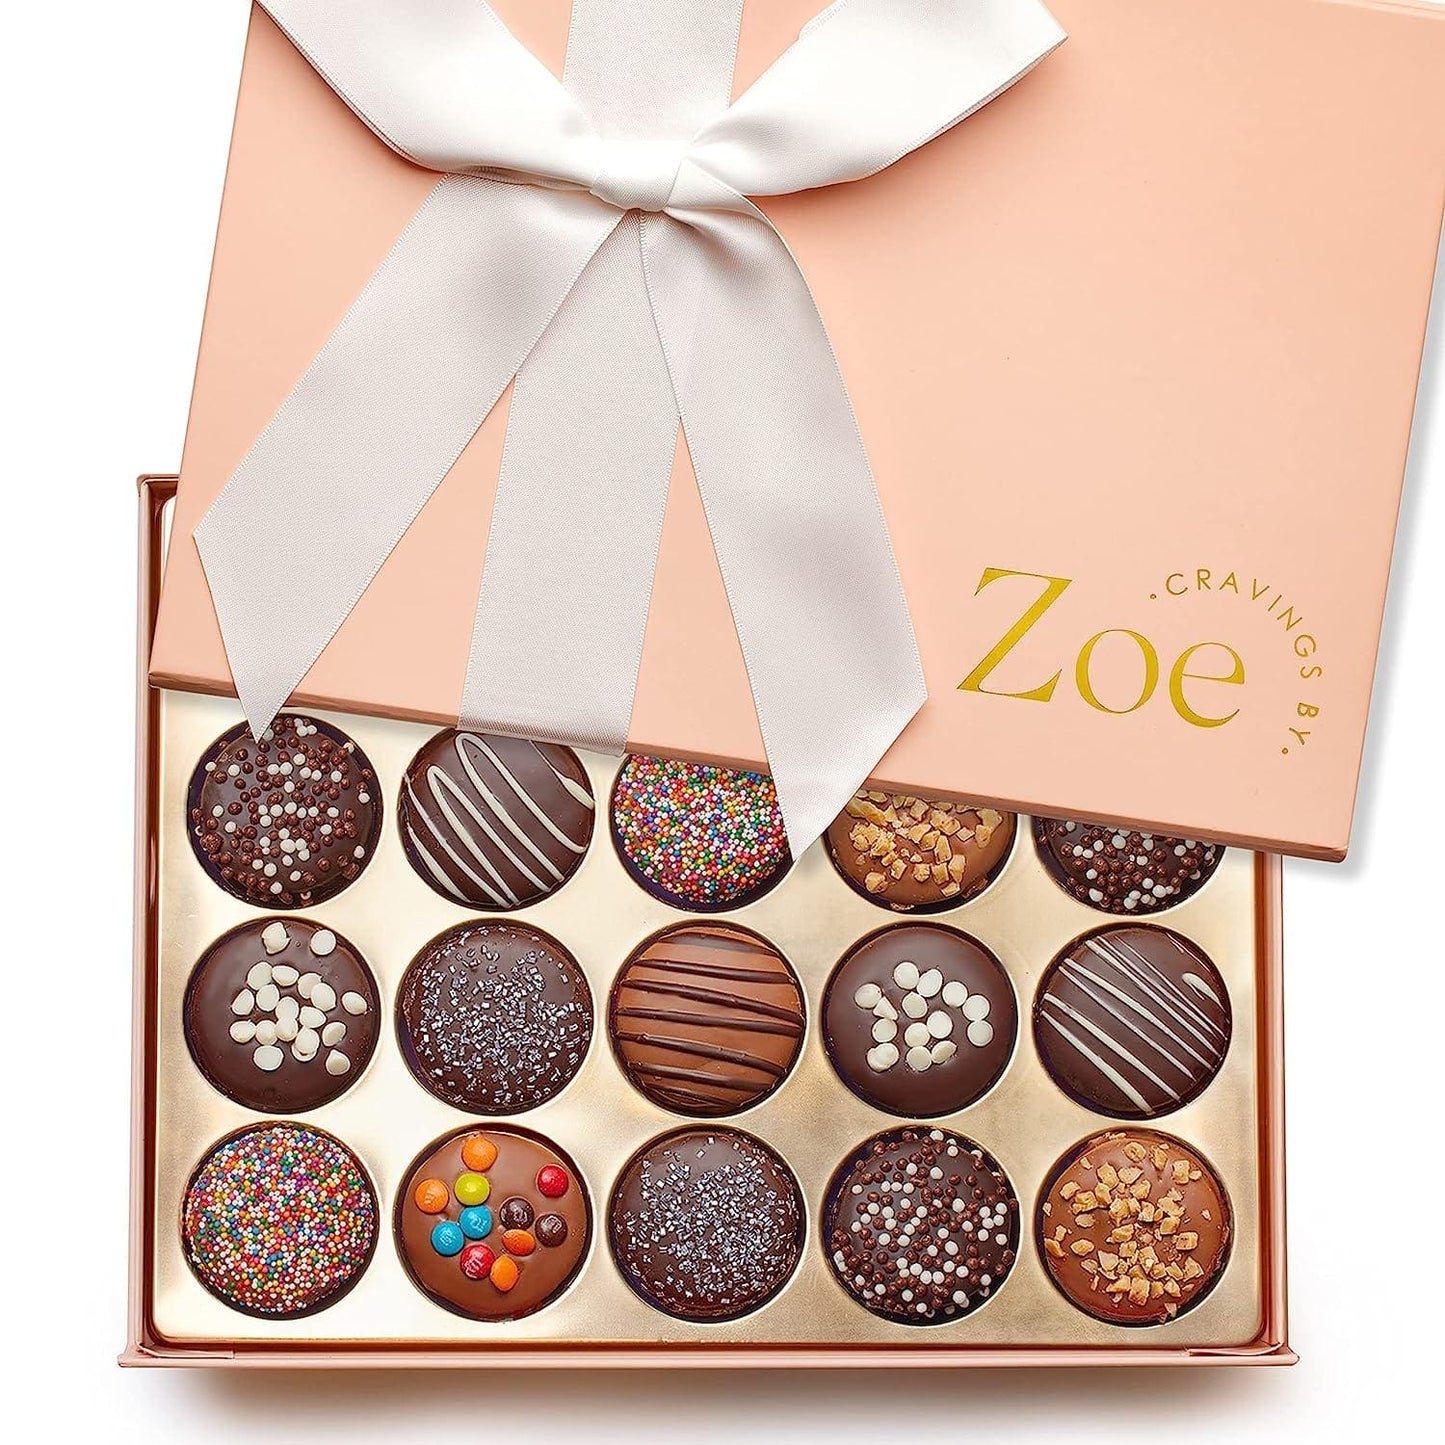 Chocolate Covered Oreos Pink Gift Box - Cravings by Zoe - Gourmet Chocolate